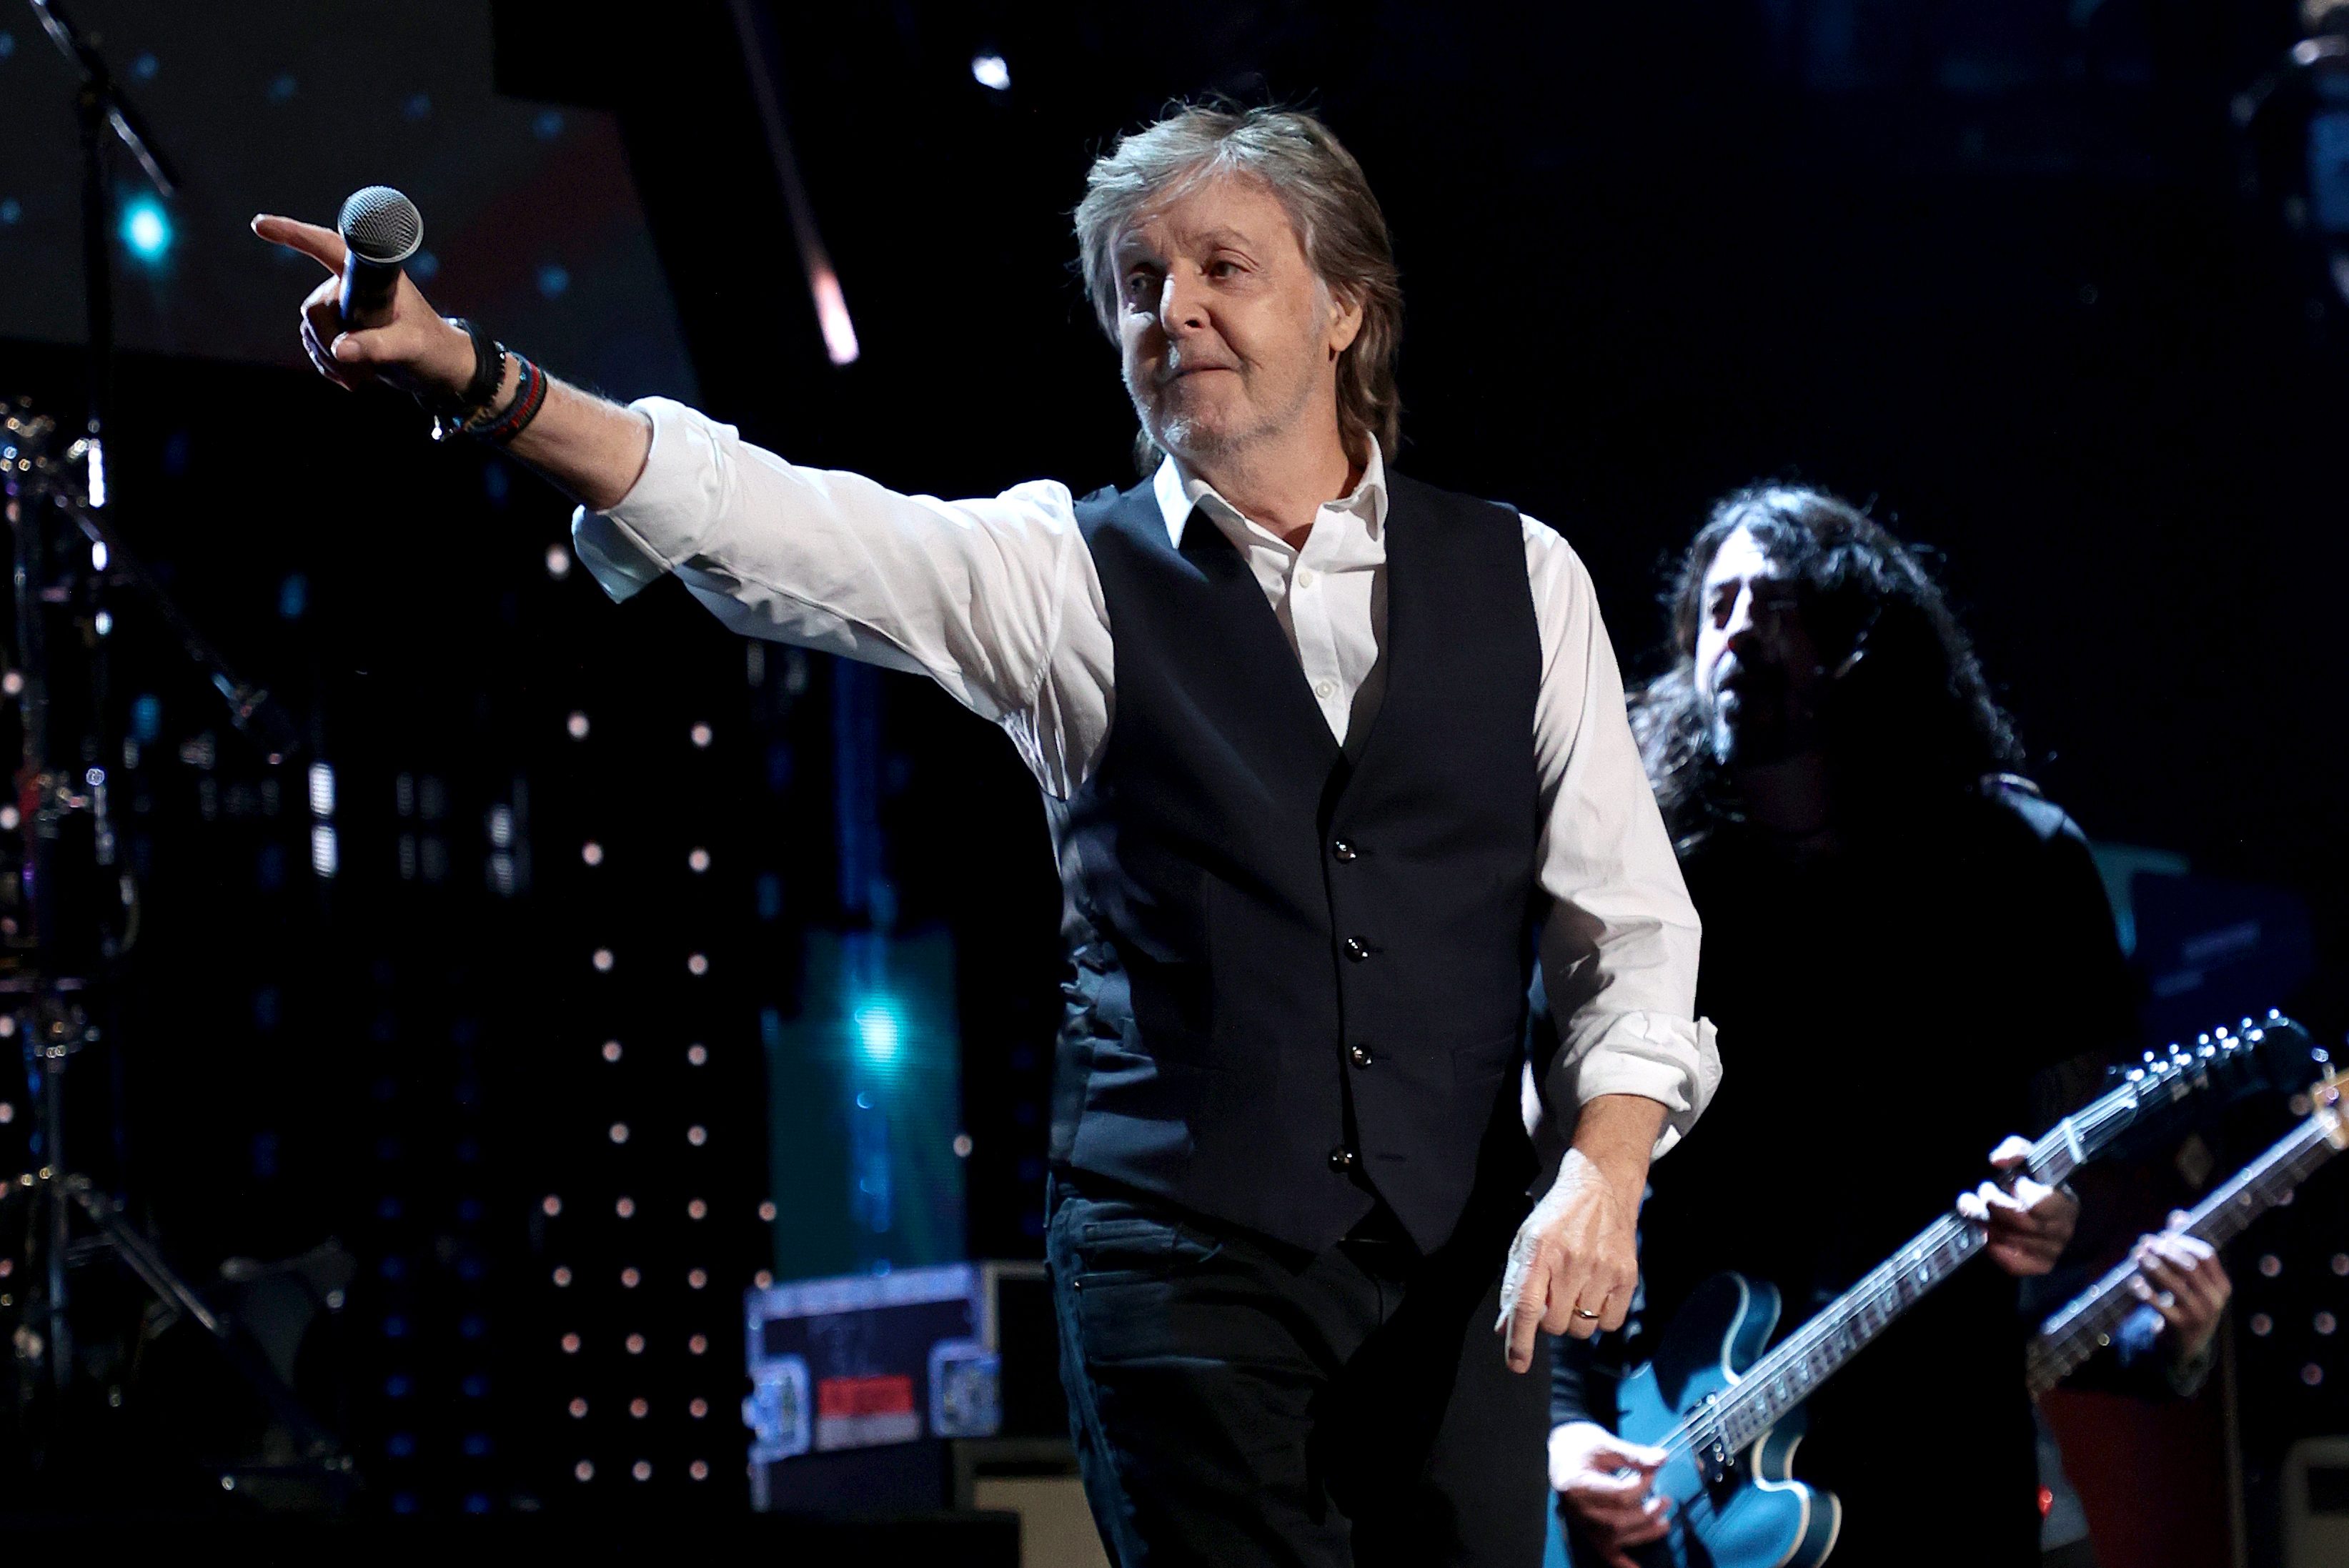 Paul McCartney performs onstage during the 36th Annual Rock & Roll Hall Of Fame Induction Ceremony on October 30, 2021 in Cleveland, Ohio.